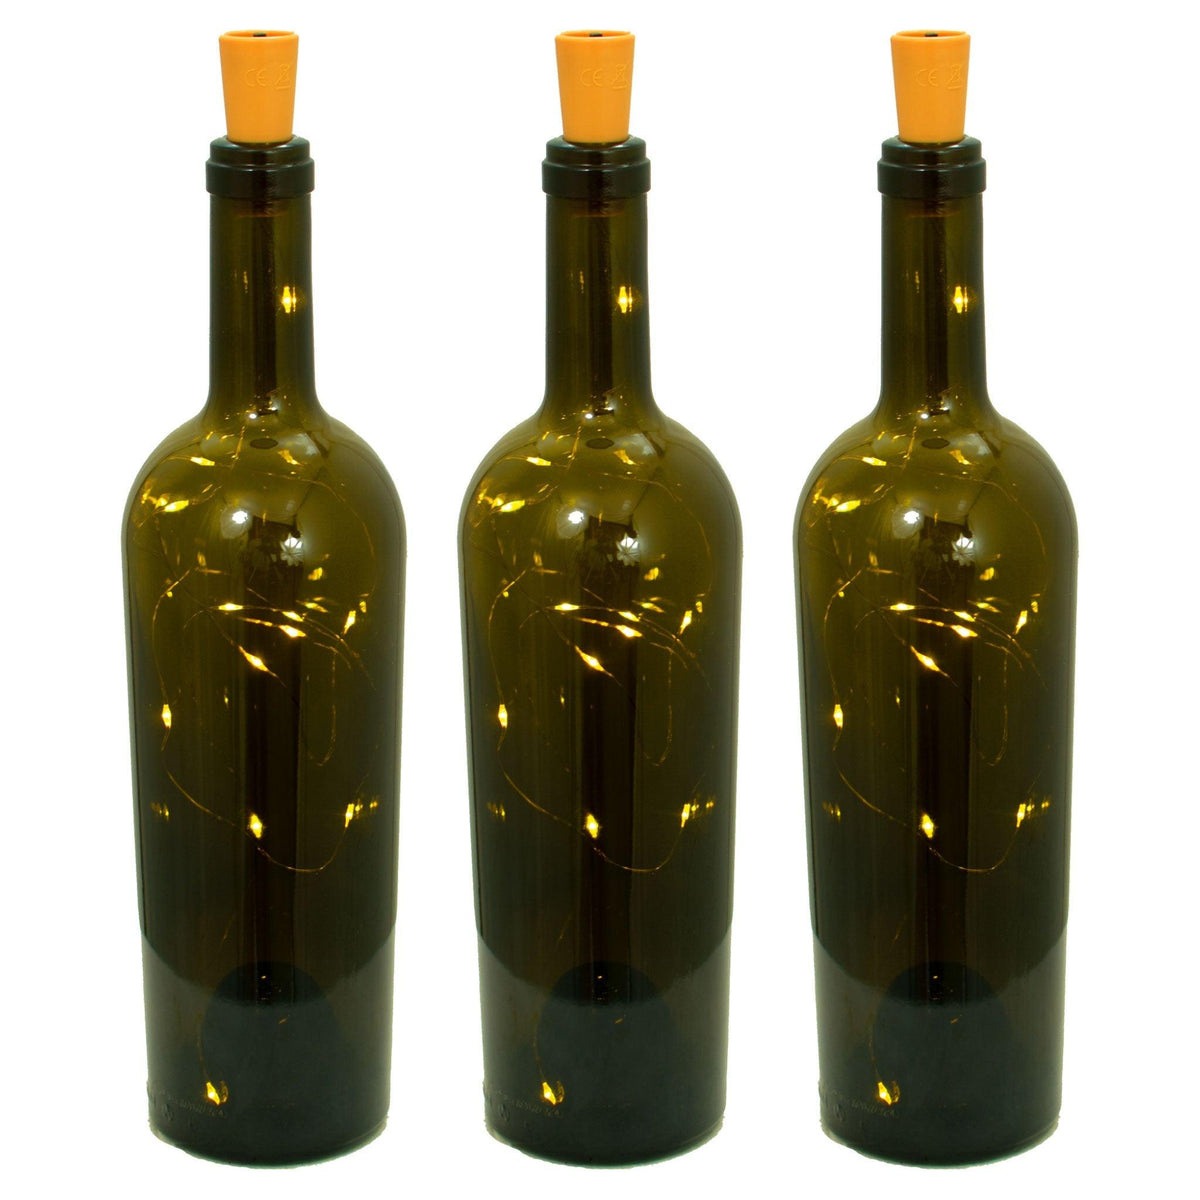 Lee Display's brand new Wine Bottle LED Fairy Lights come in a pack of 3.  Buy them now at leedisplay.com